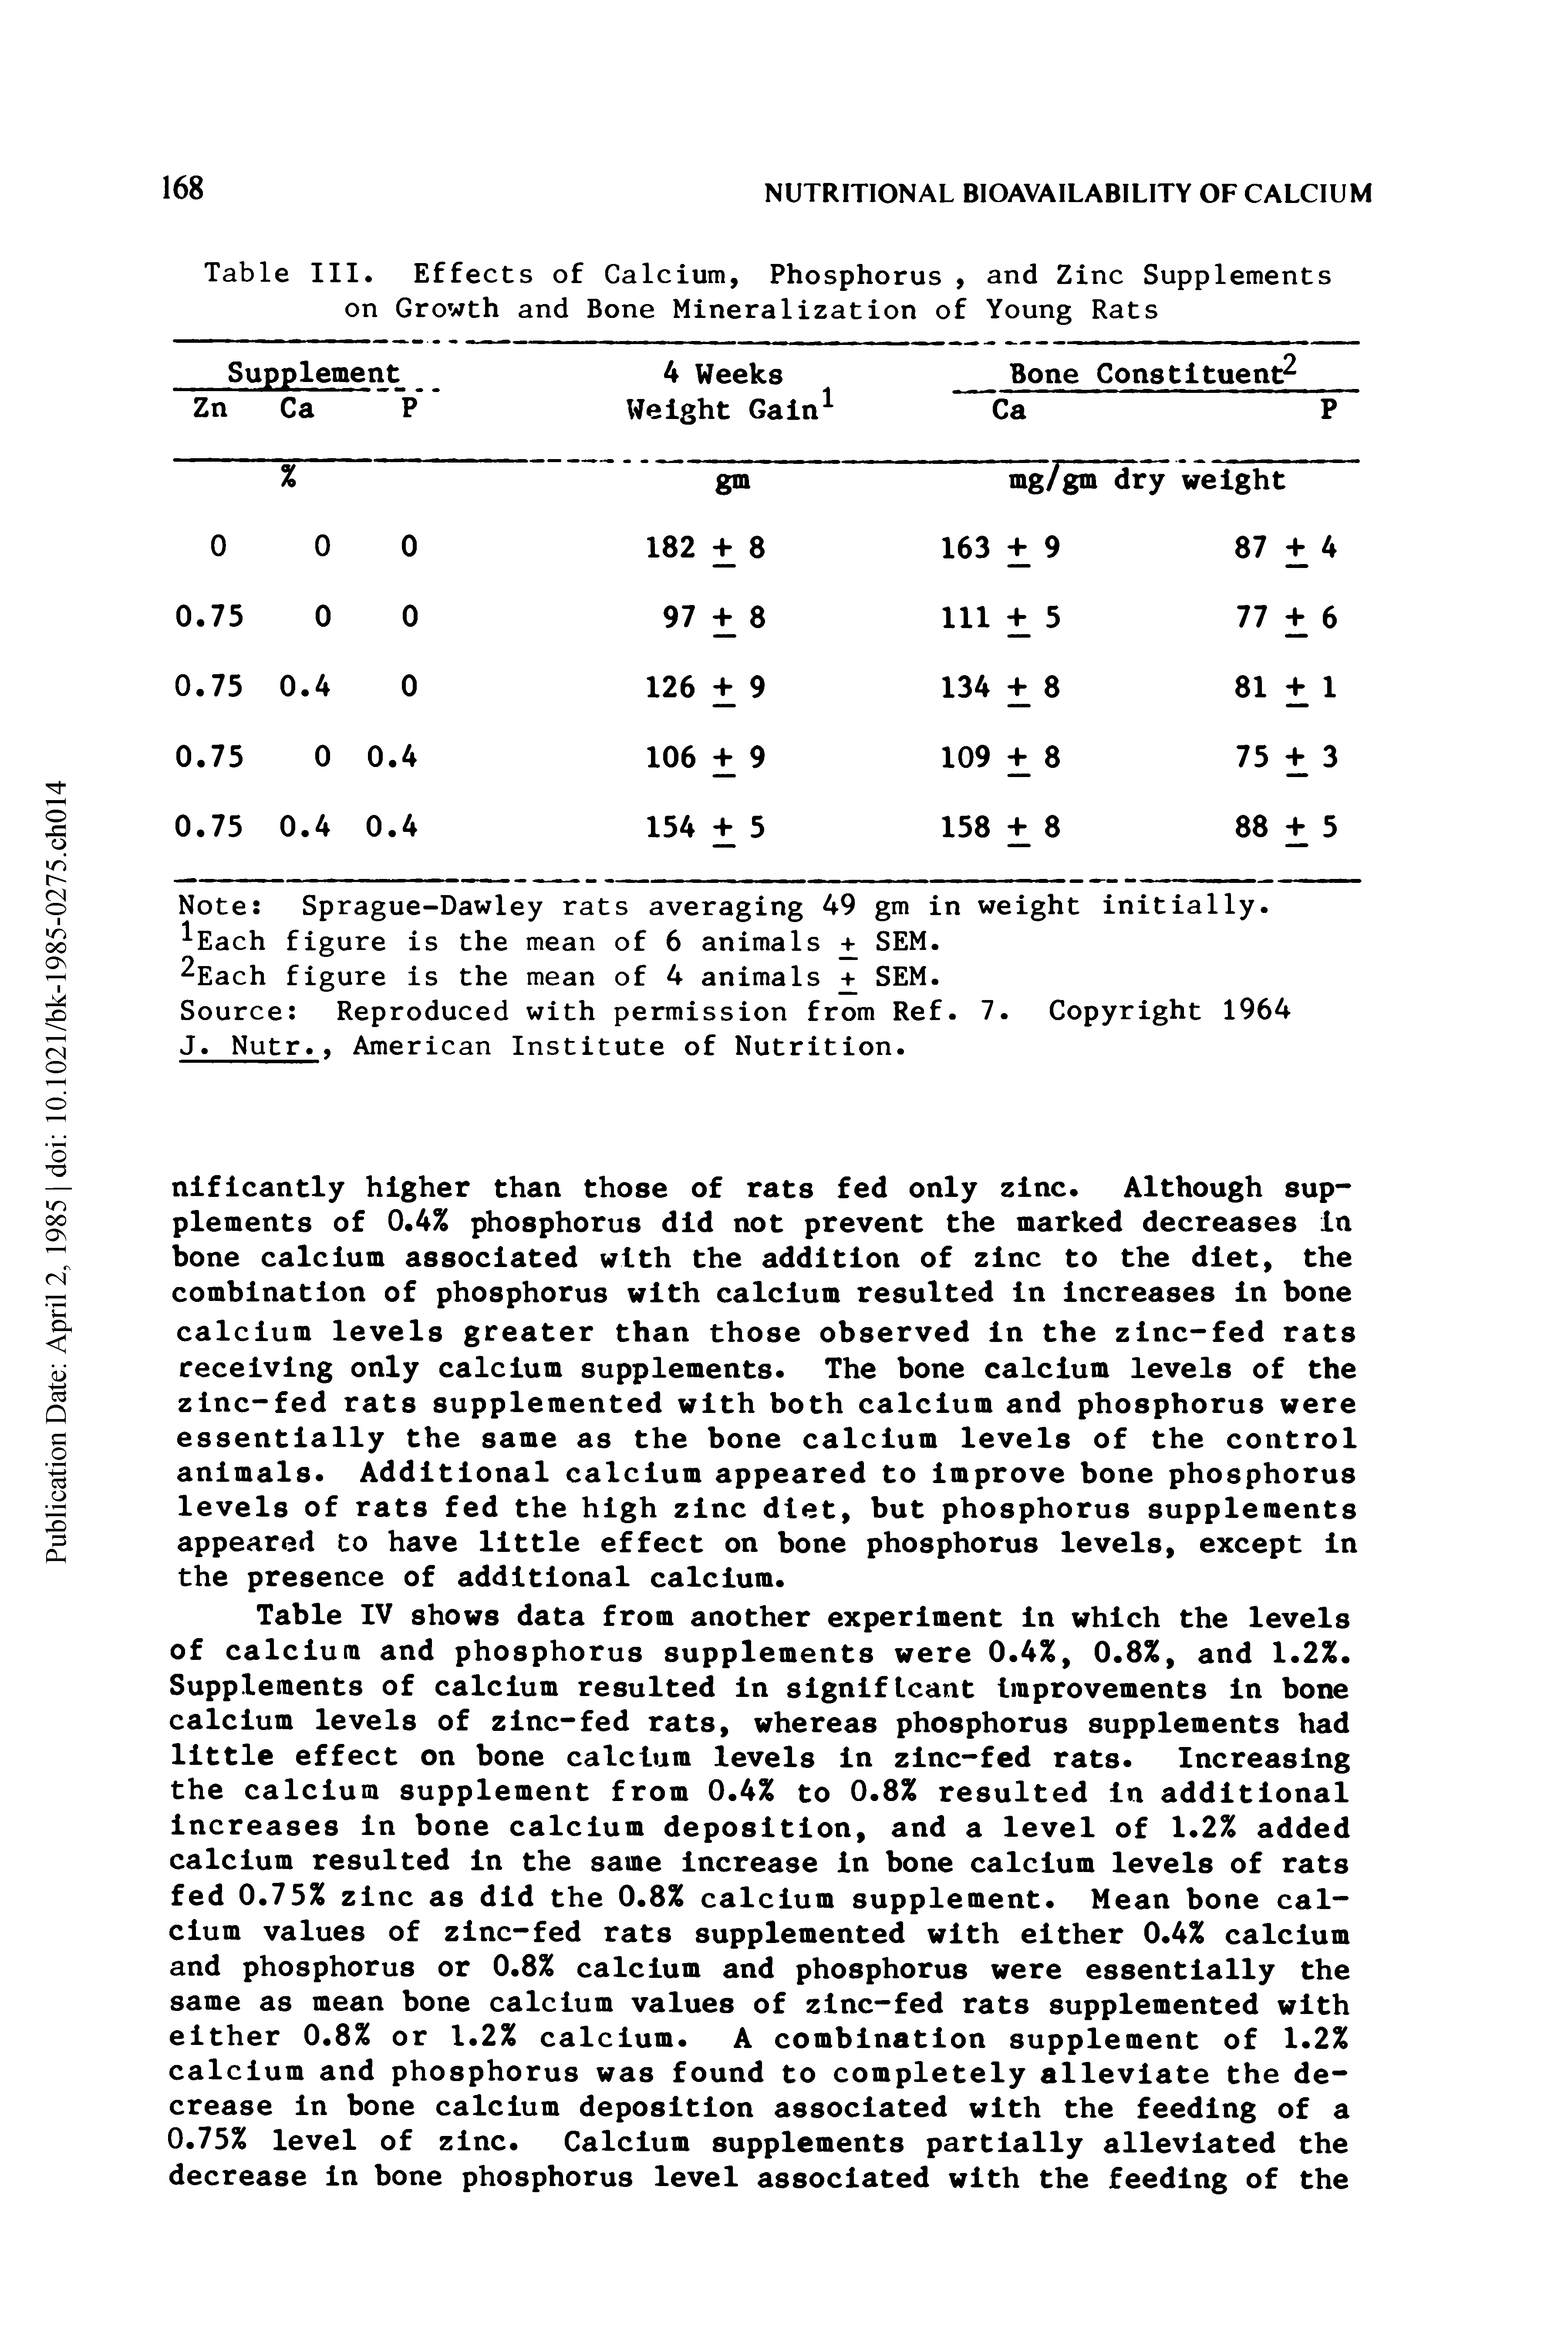 Table IV shows data from another experiment in which the levels of calcium and phosphorus supplements were 0.4%, 0.8%, and 1.2%. Supplements of calcium resulted in significant Improvements in bone calcium levels of zinc-fed rats, whereas phosphorus supplements had little effect on bone calcium levels in zinc-fed rats. Increasing the calcium supplement from 0.4% to 0.8% resulted in additional increases in bone calcium deposition, and a level of 1.2% added calcium resulted in the same increase in bone calcium levels of rats fed 0.75% zinc as did the 0.8% calcium supplement. Mean bone calcium values of zinc-fed rats supplemented with either 0.4% calcium and phosphorus or 0.8% calcium and phosphorus were essentially the same as mean bone calcium values of zinc-fed rats supplemented with either 0.8% or 1.2% calcium. A combination supplement of 1.2% calcium and phosphorus was found to completely alleviate the decrease in bone calcium deposition associated with the feeding of a 0.75% level of zinc. Calcium supplements partially alleviated the decrease in bone phosphorus level associated with the feeding of the...